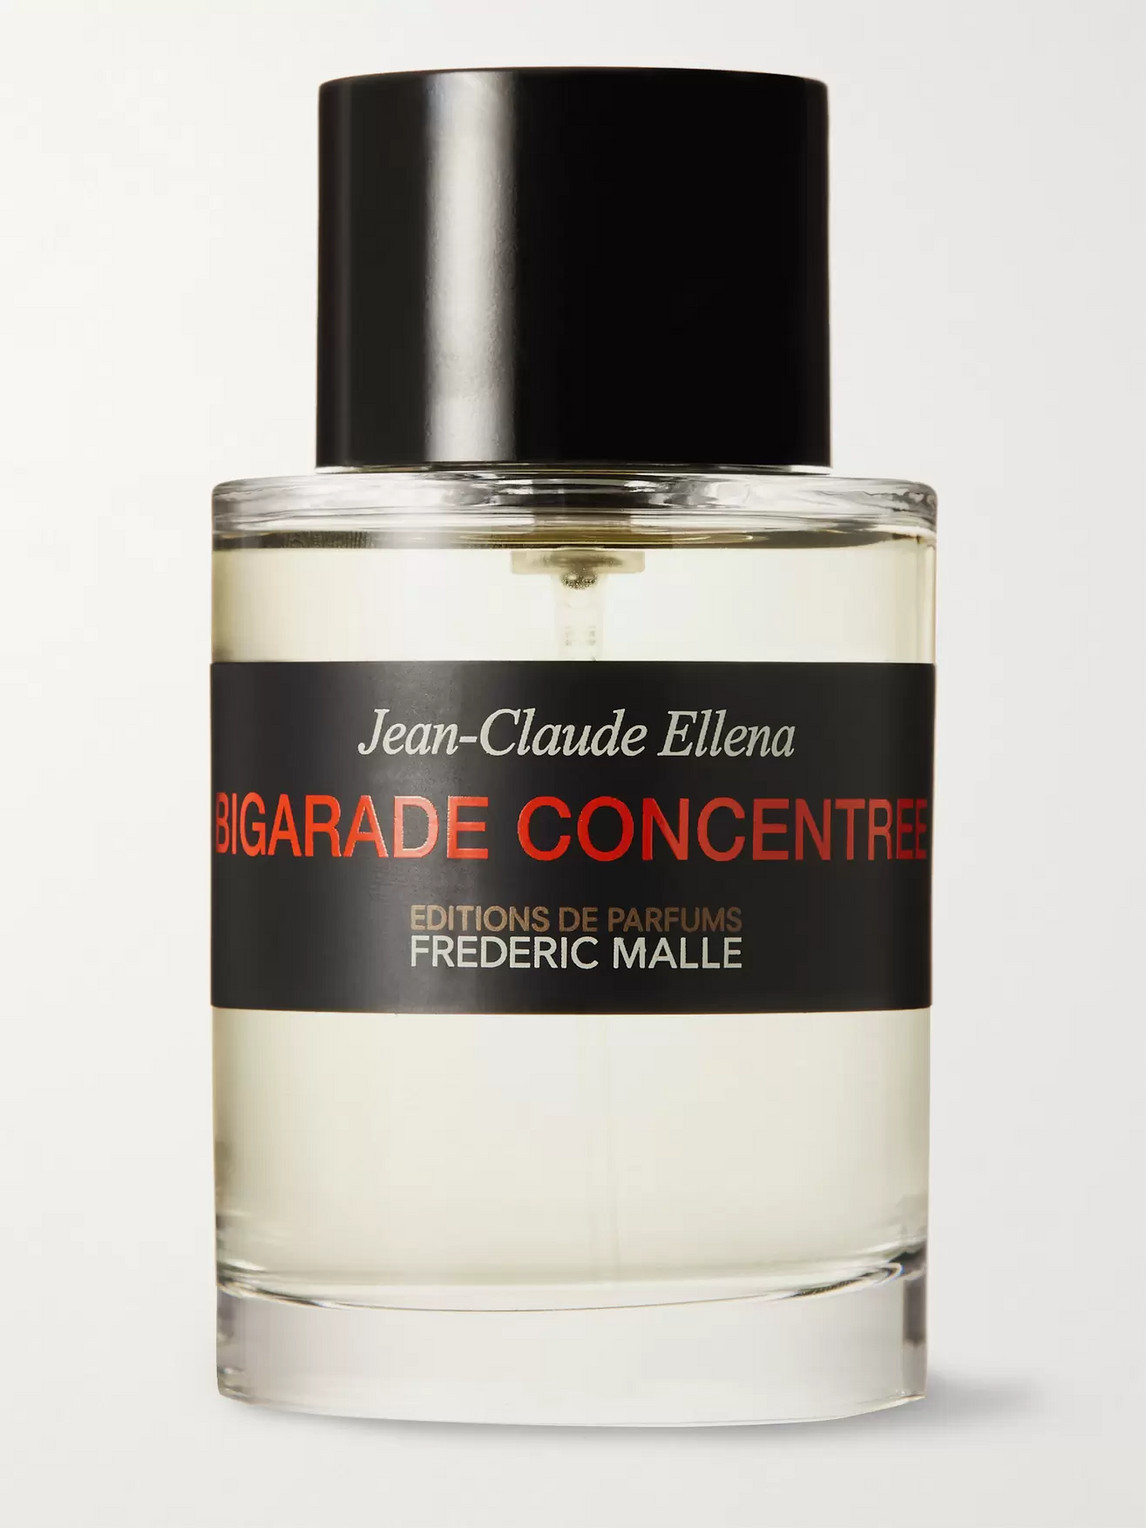 Frederic Malle Bigarade Concentree Eau De Parfum, 100ml In Colorless